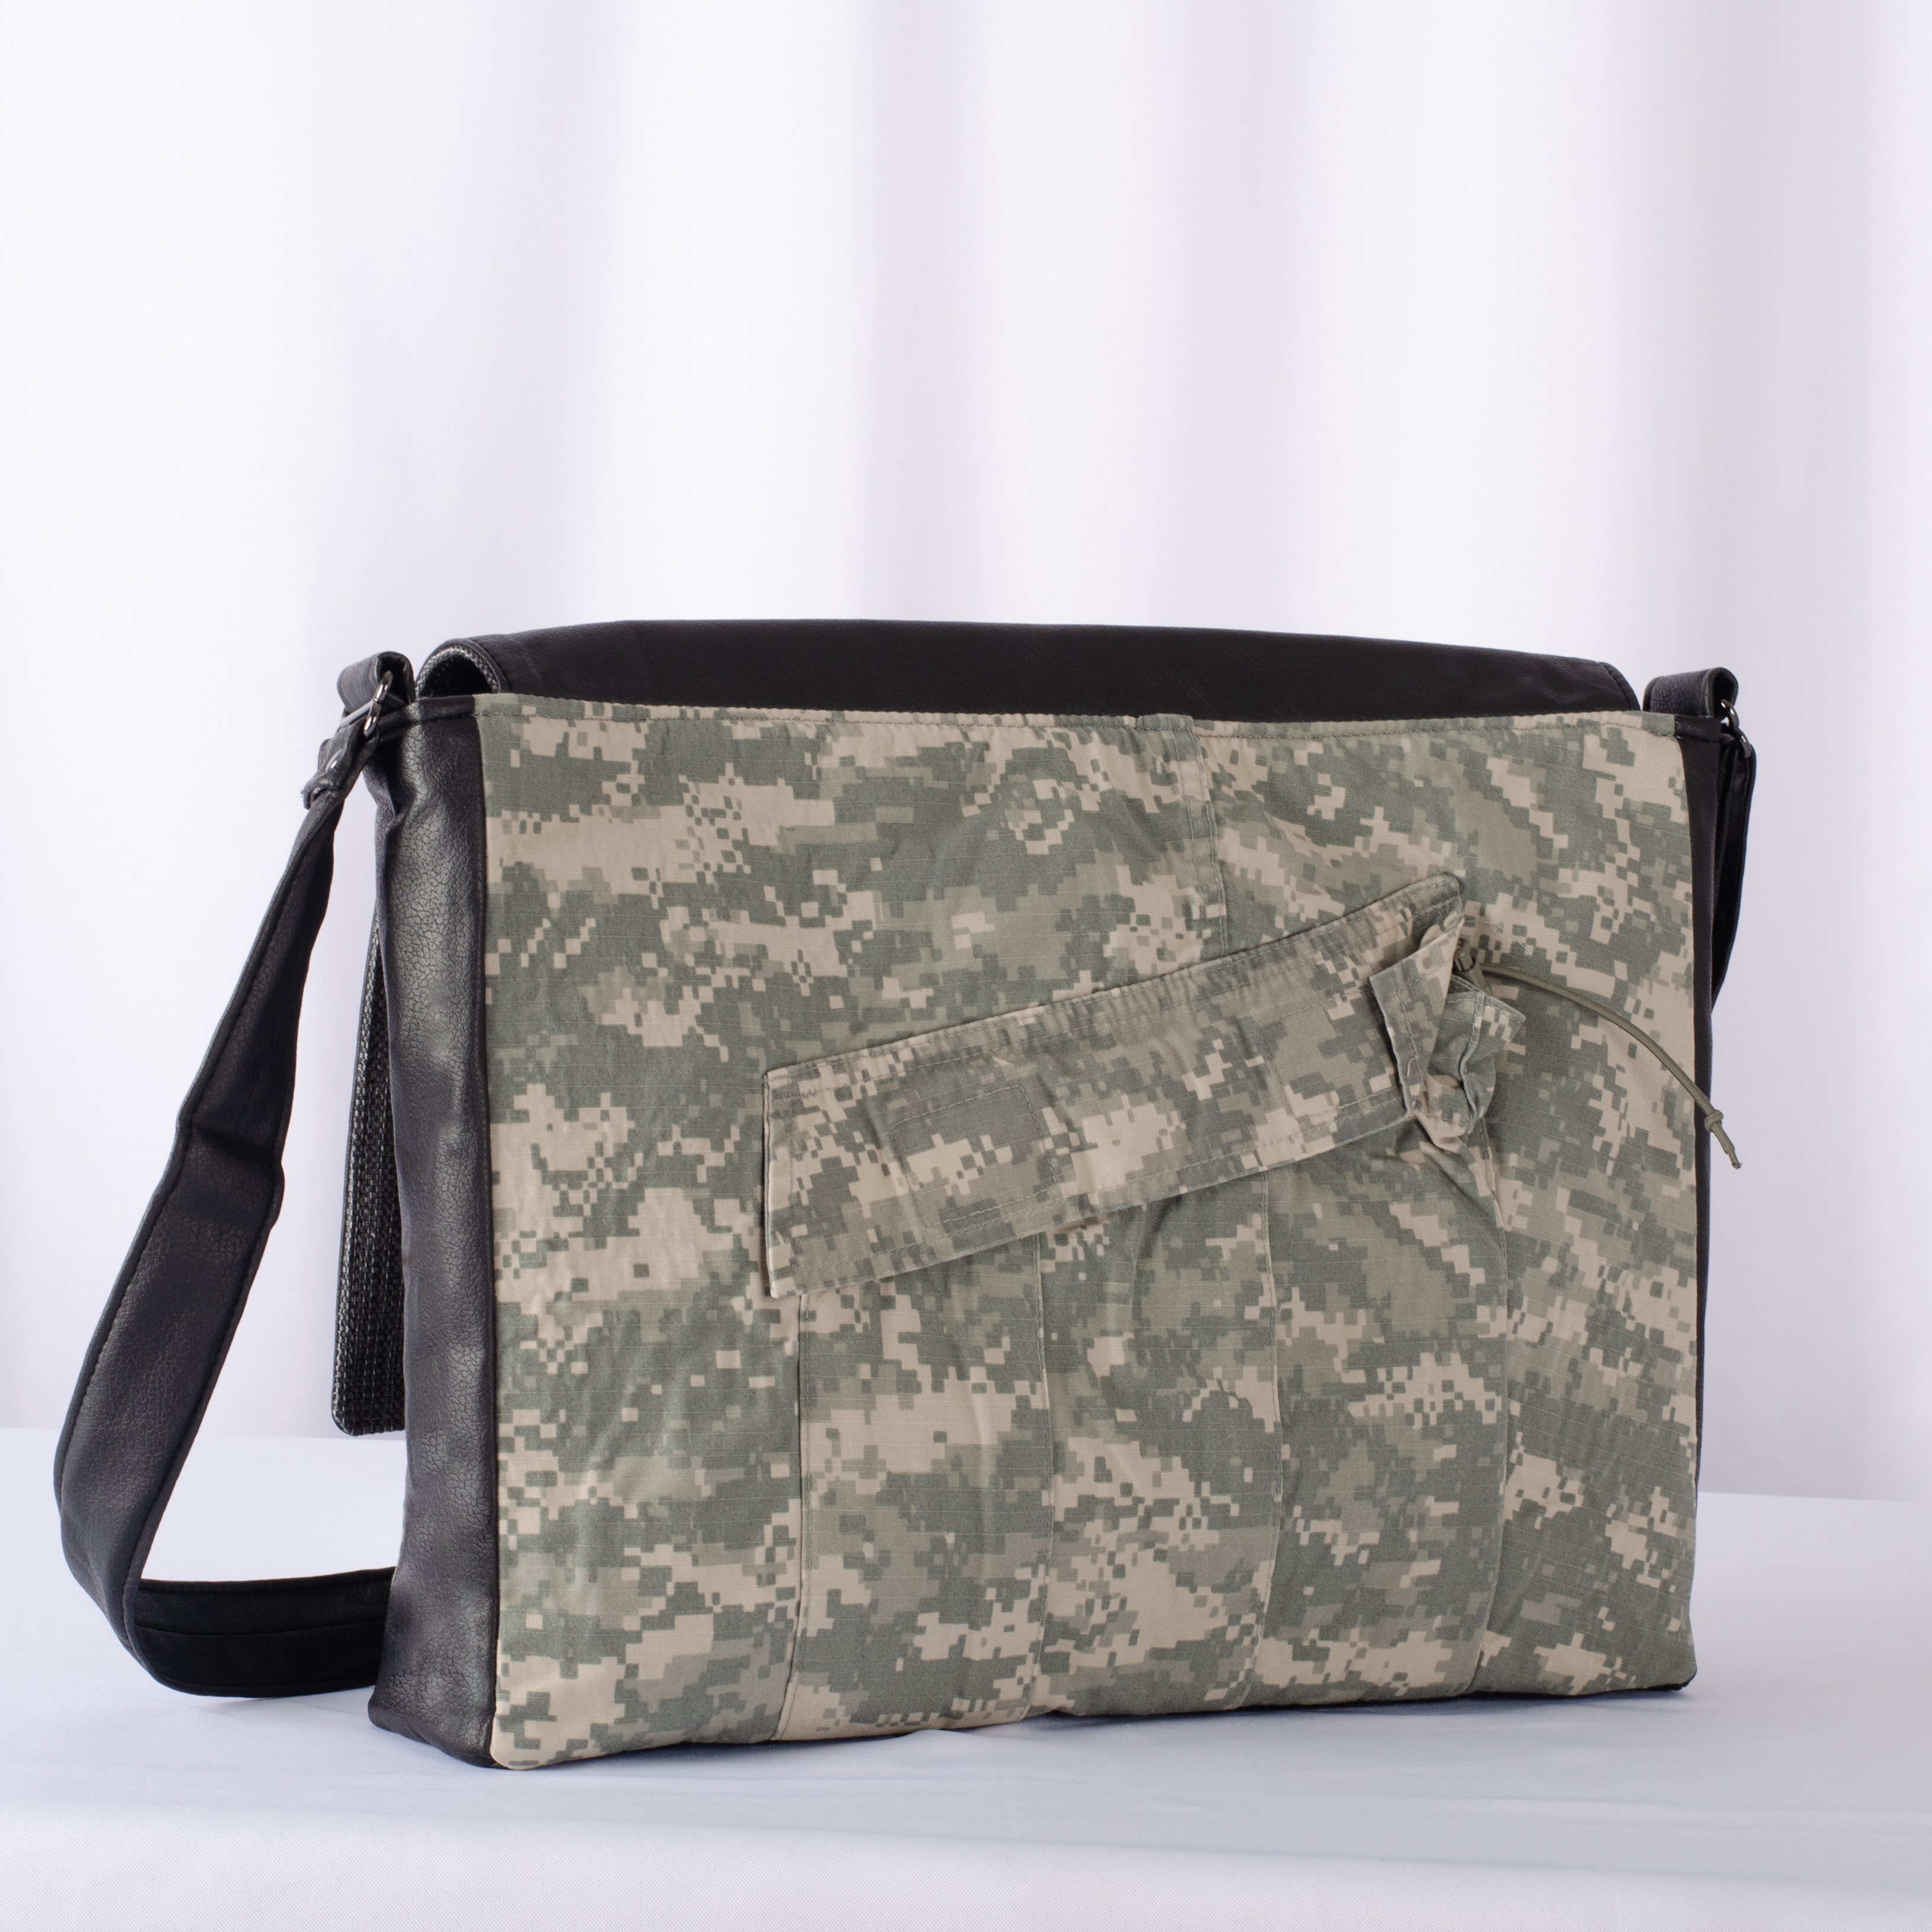 US Army Uniform Mixed Media Large Messenger (choice of accent color)